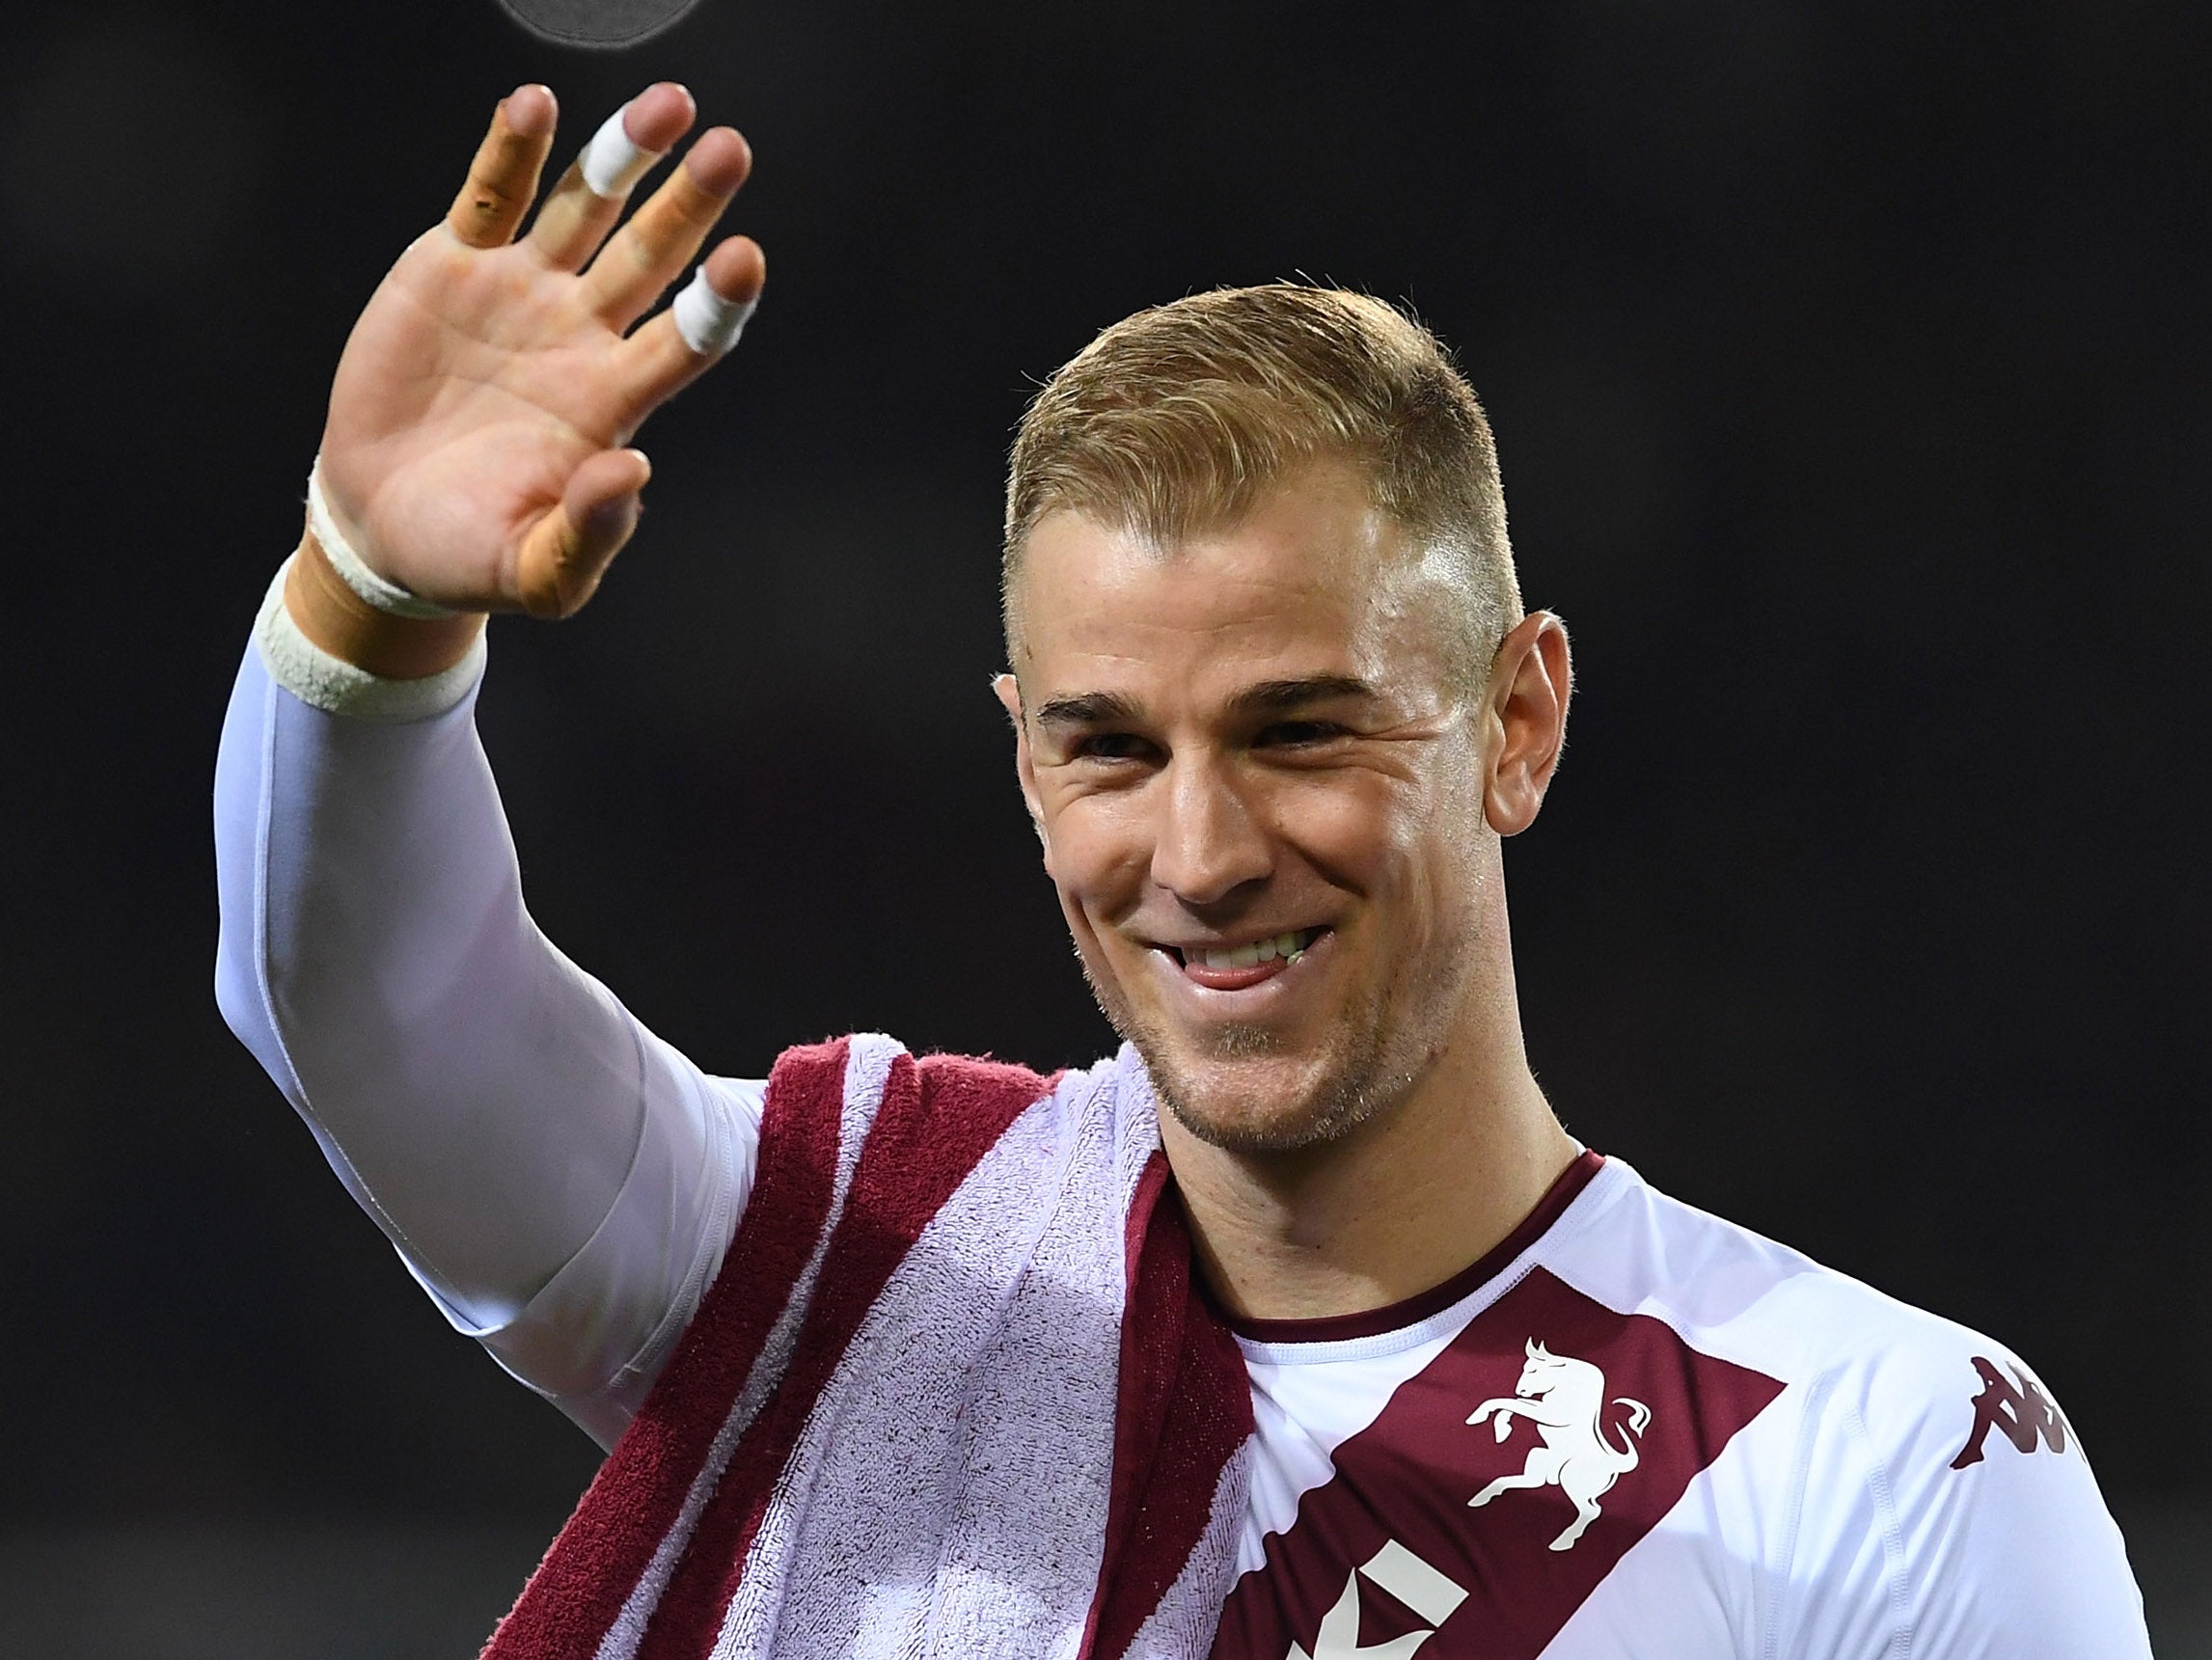 Hart is currently on a season-long loan at Torino